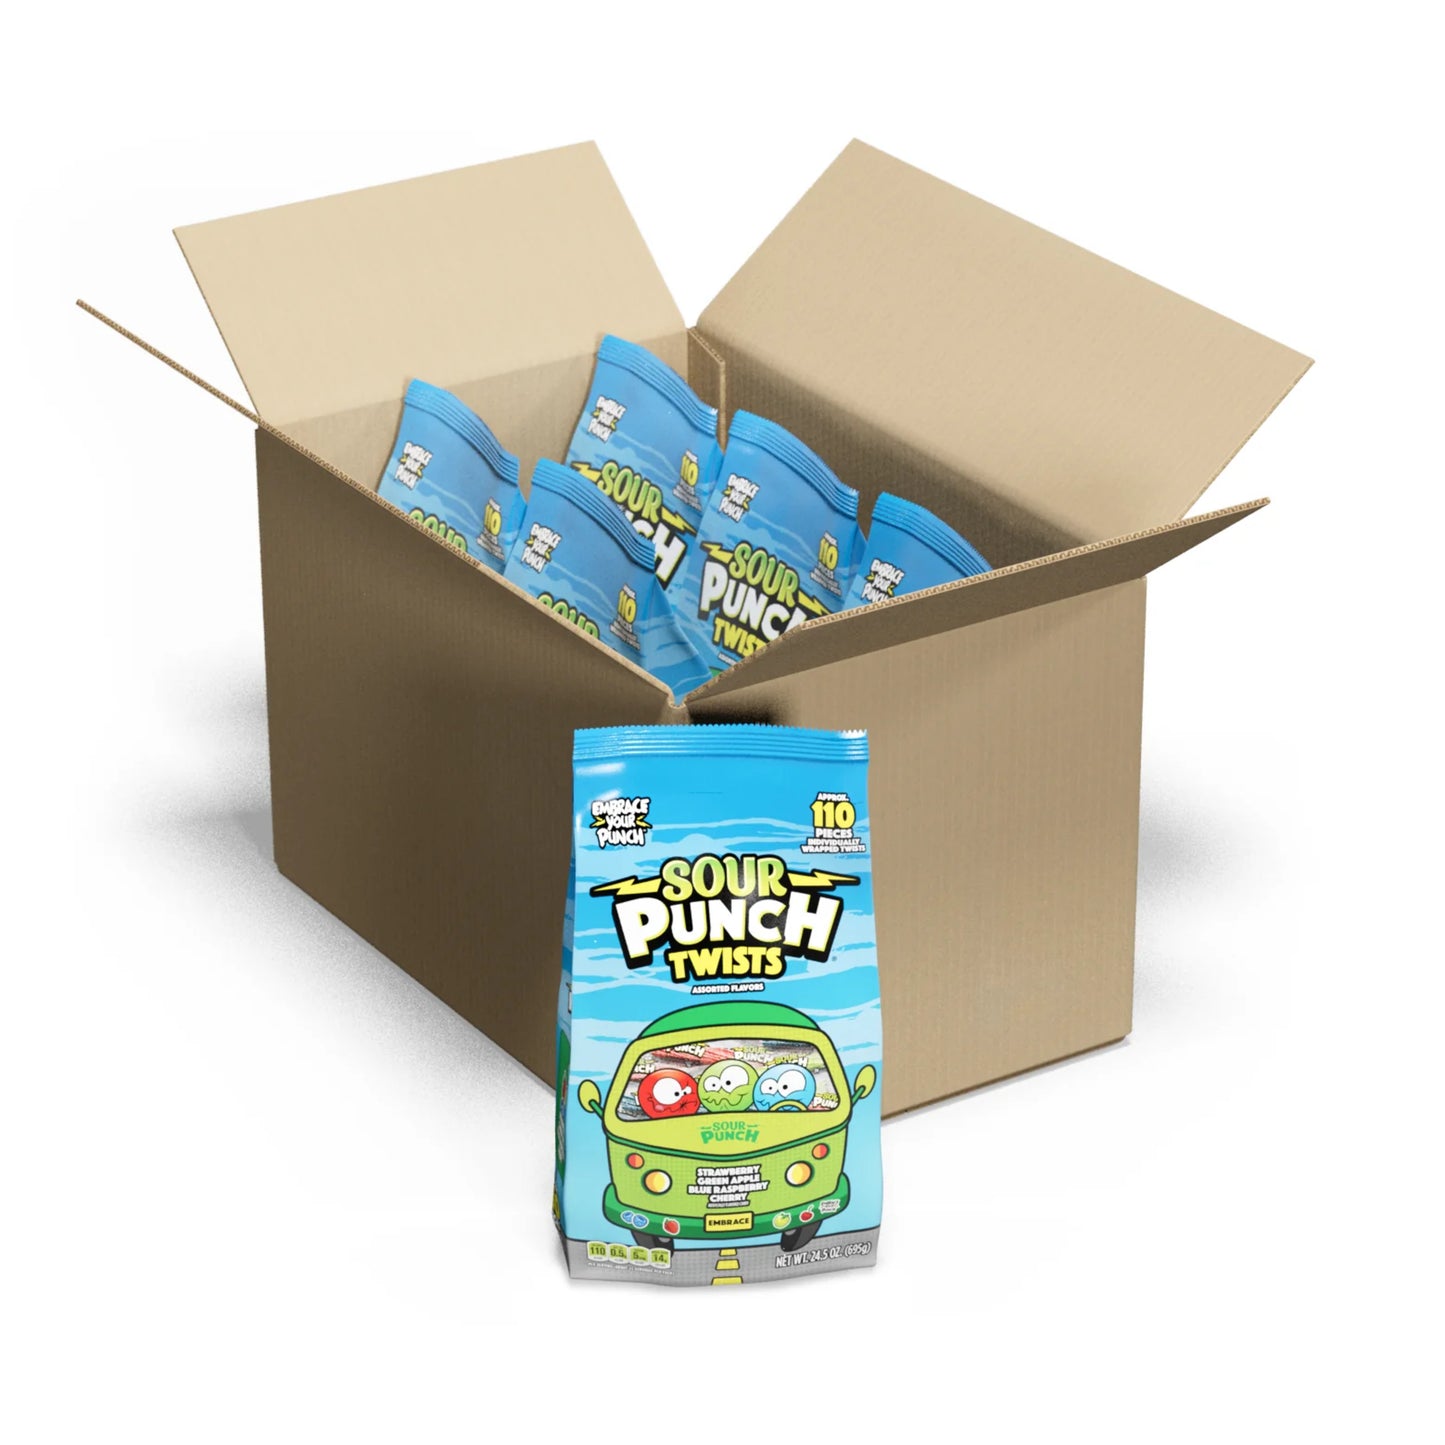 SOUR PUNCH Individually Wrapped Candy Twists (6-Pack)